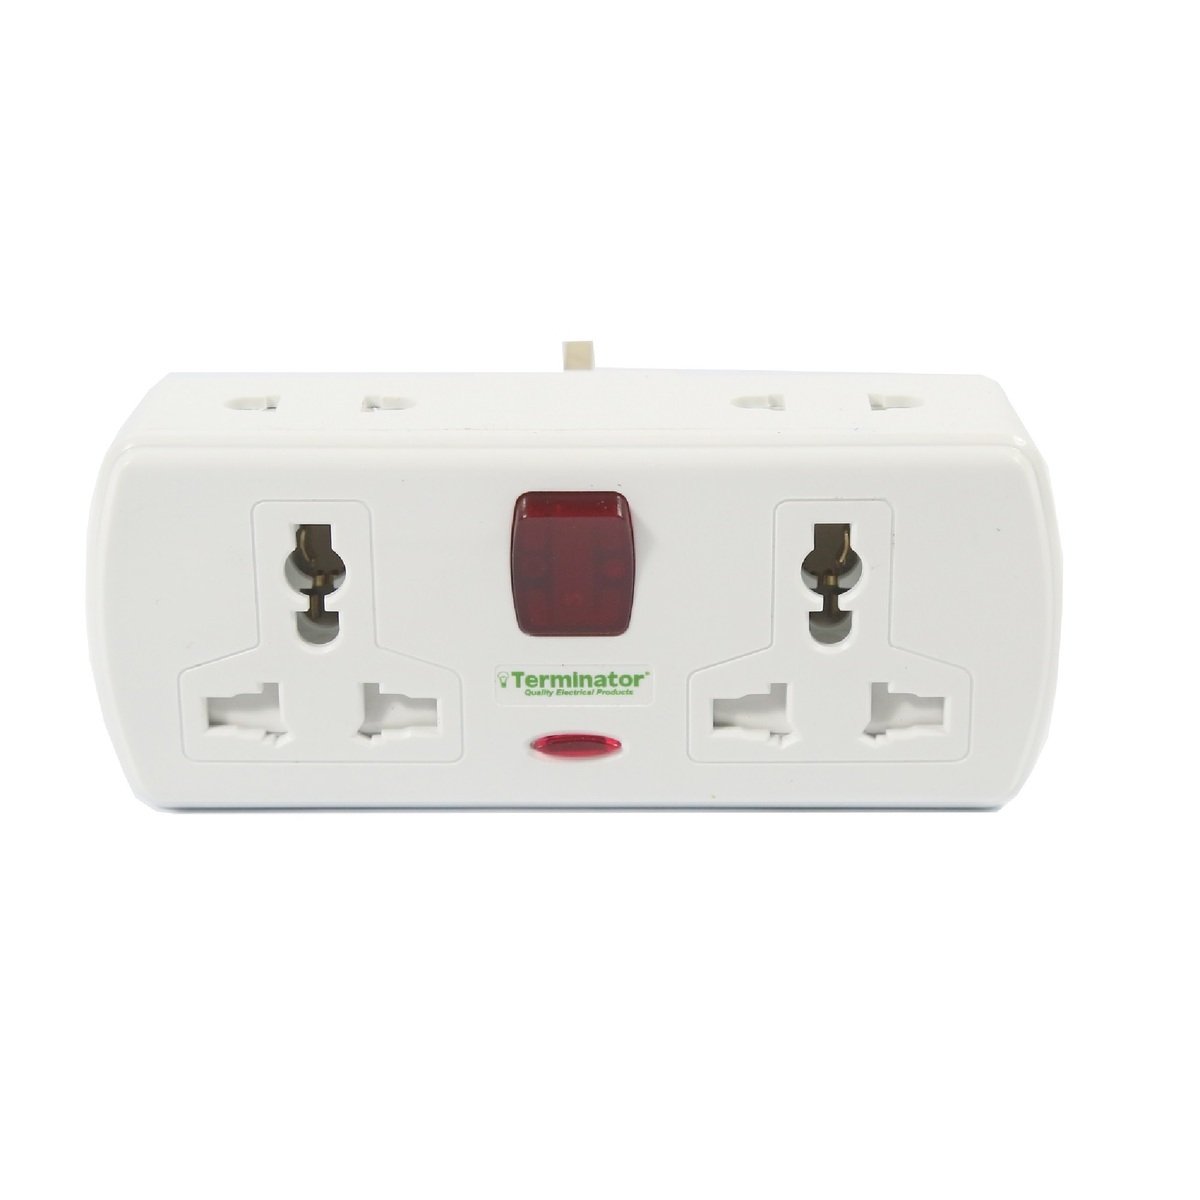 Terminator T-Socket 4Way With Switch 164